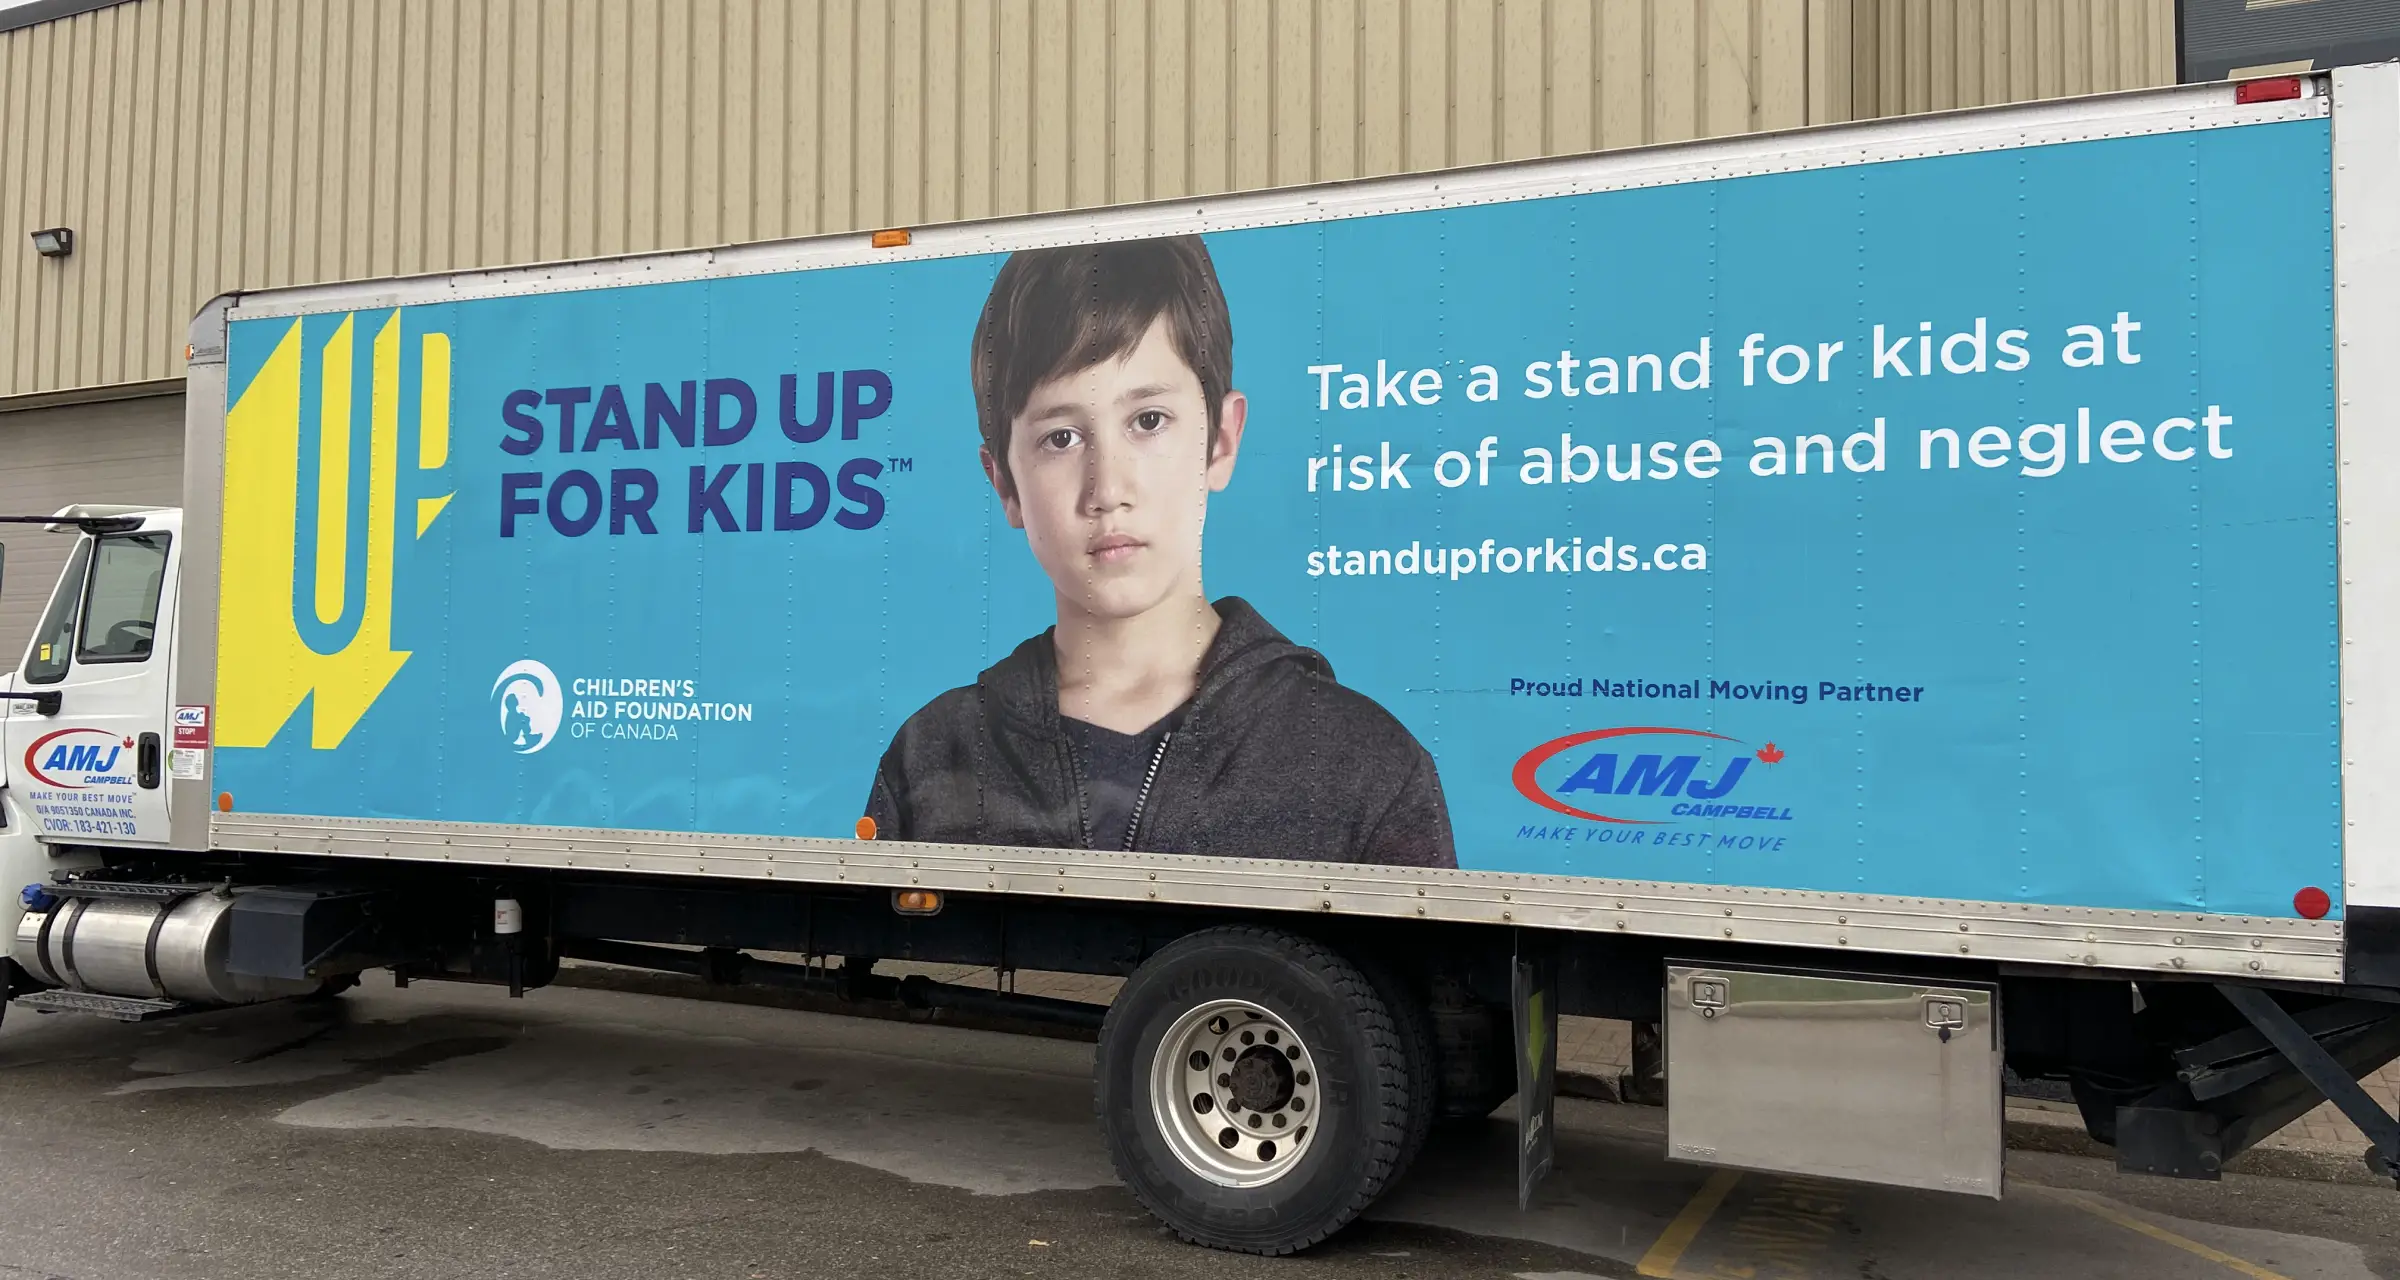 Stand Up for Kids advertisement on the side of a transport truck featuring a child in the centre